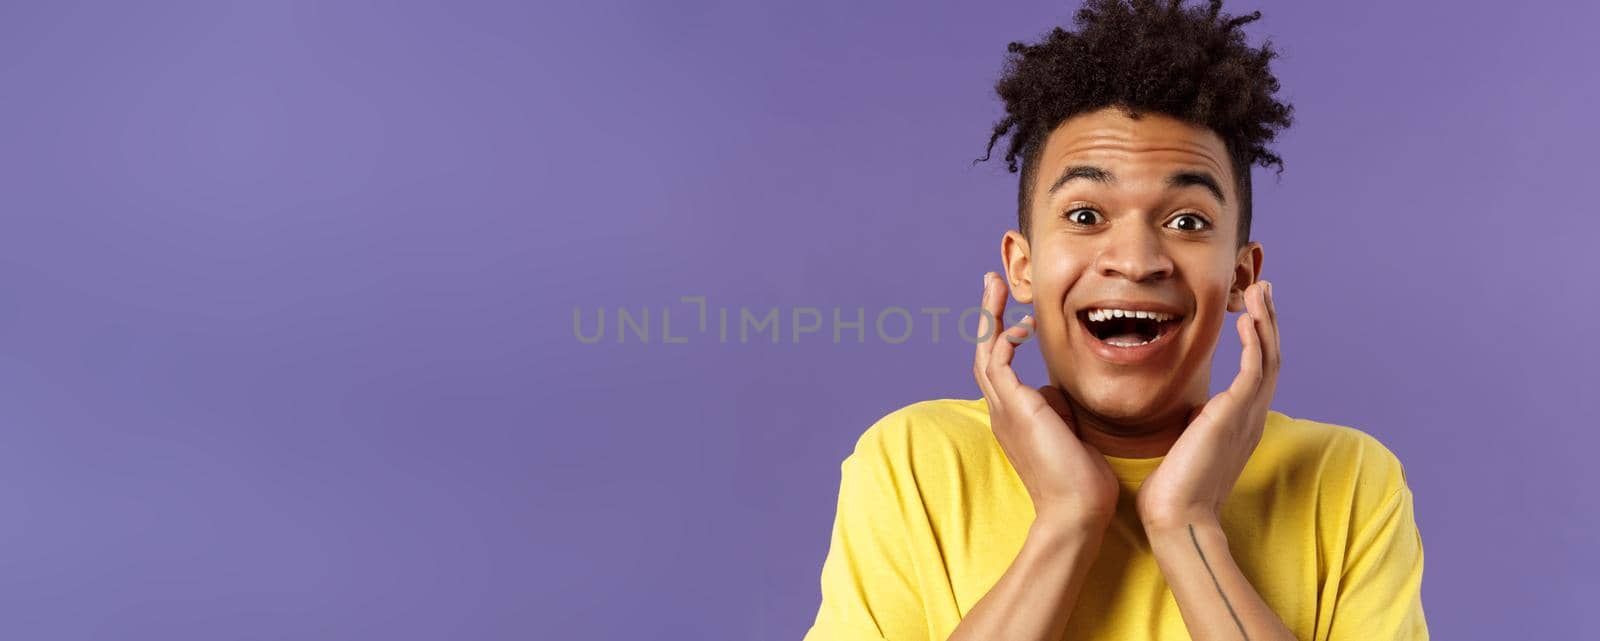 Close-up portrait of extremely happy, enthusiastic young man hear fantastic news, looking surprised and excited, touching face in joy, smiling upbeat look camera astonished, purple background by Benzoix